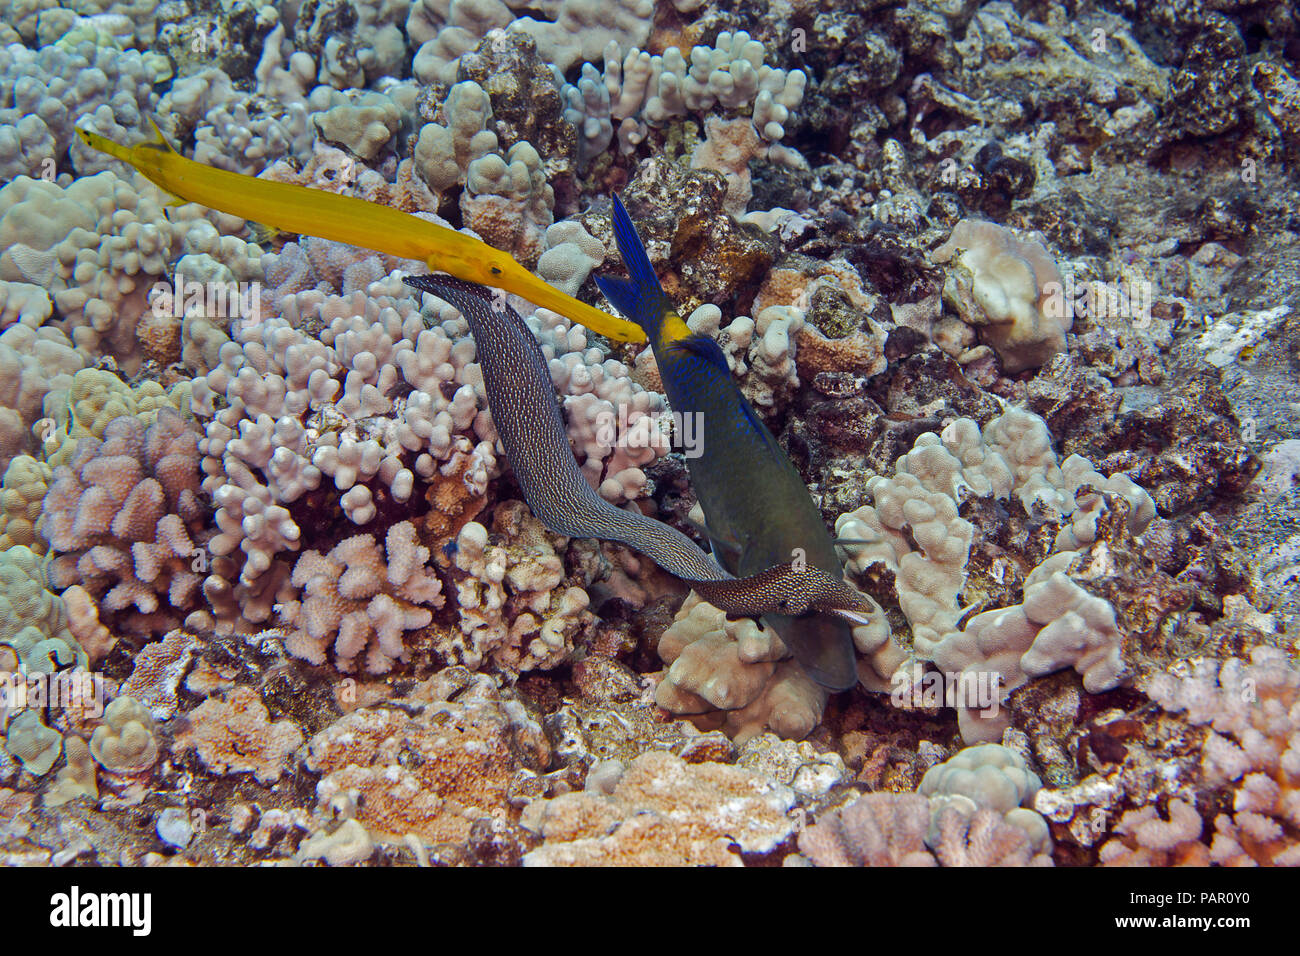 This blue goatfish, Parupeneus cyclostomus, is joined by a trumpetfish, Aulostomus chinensis, and a young whitemouth moray, Gymnothorax meleagris, all Stock Photo